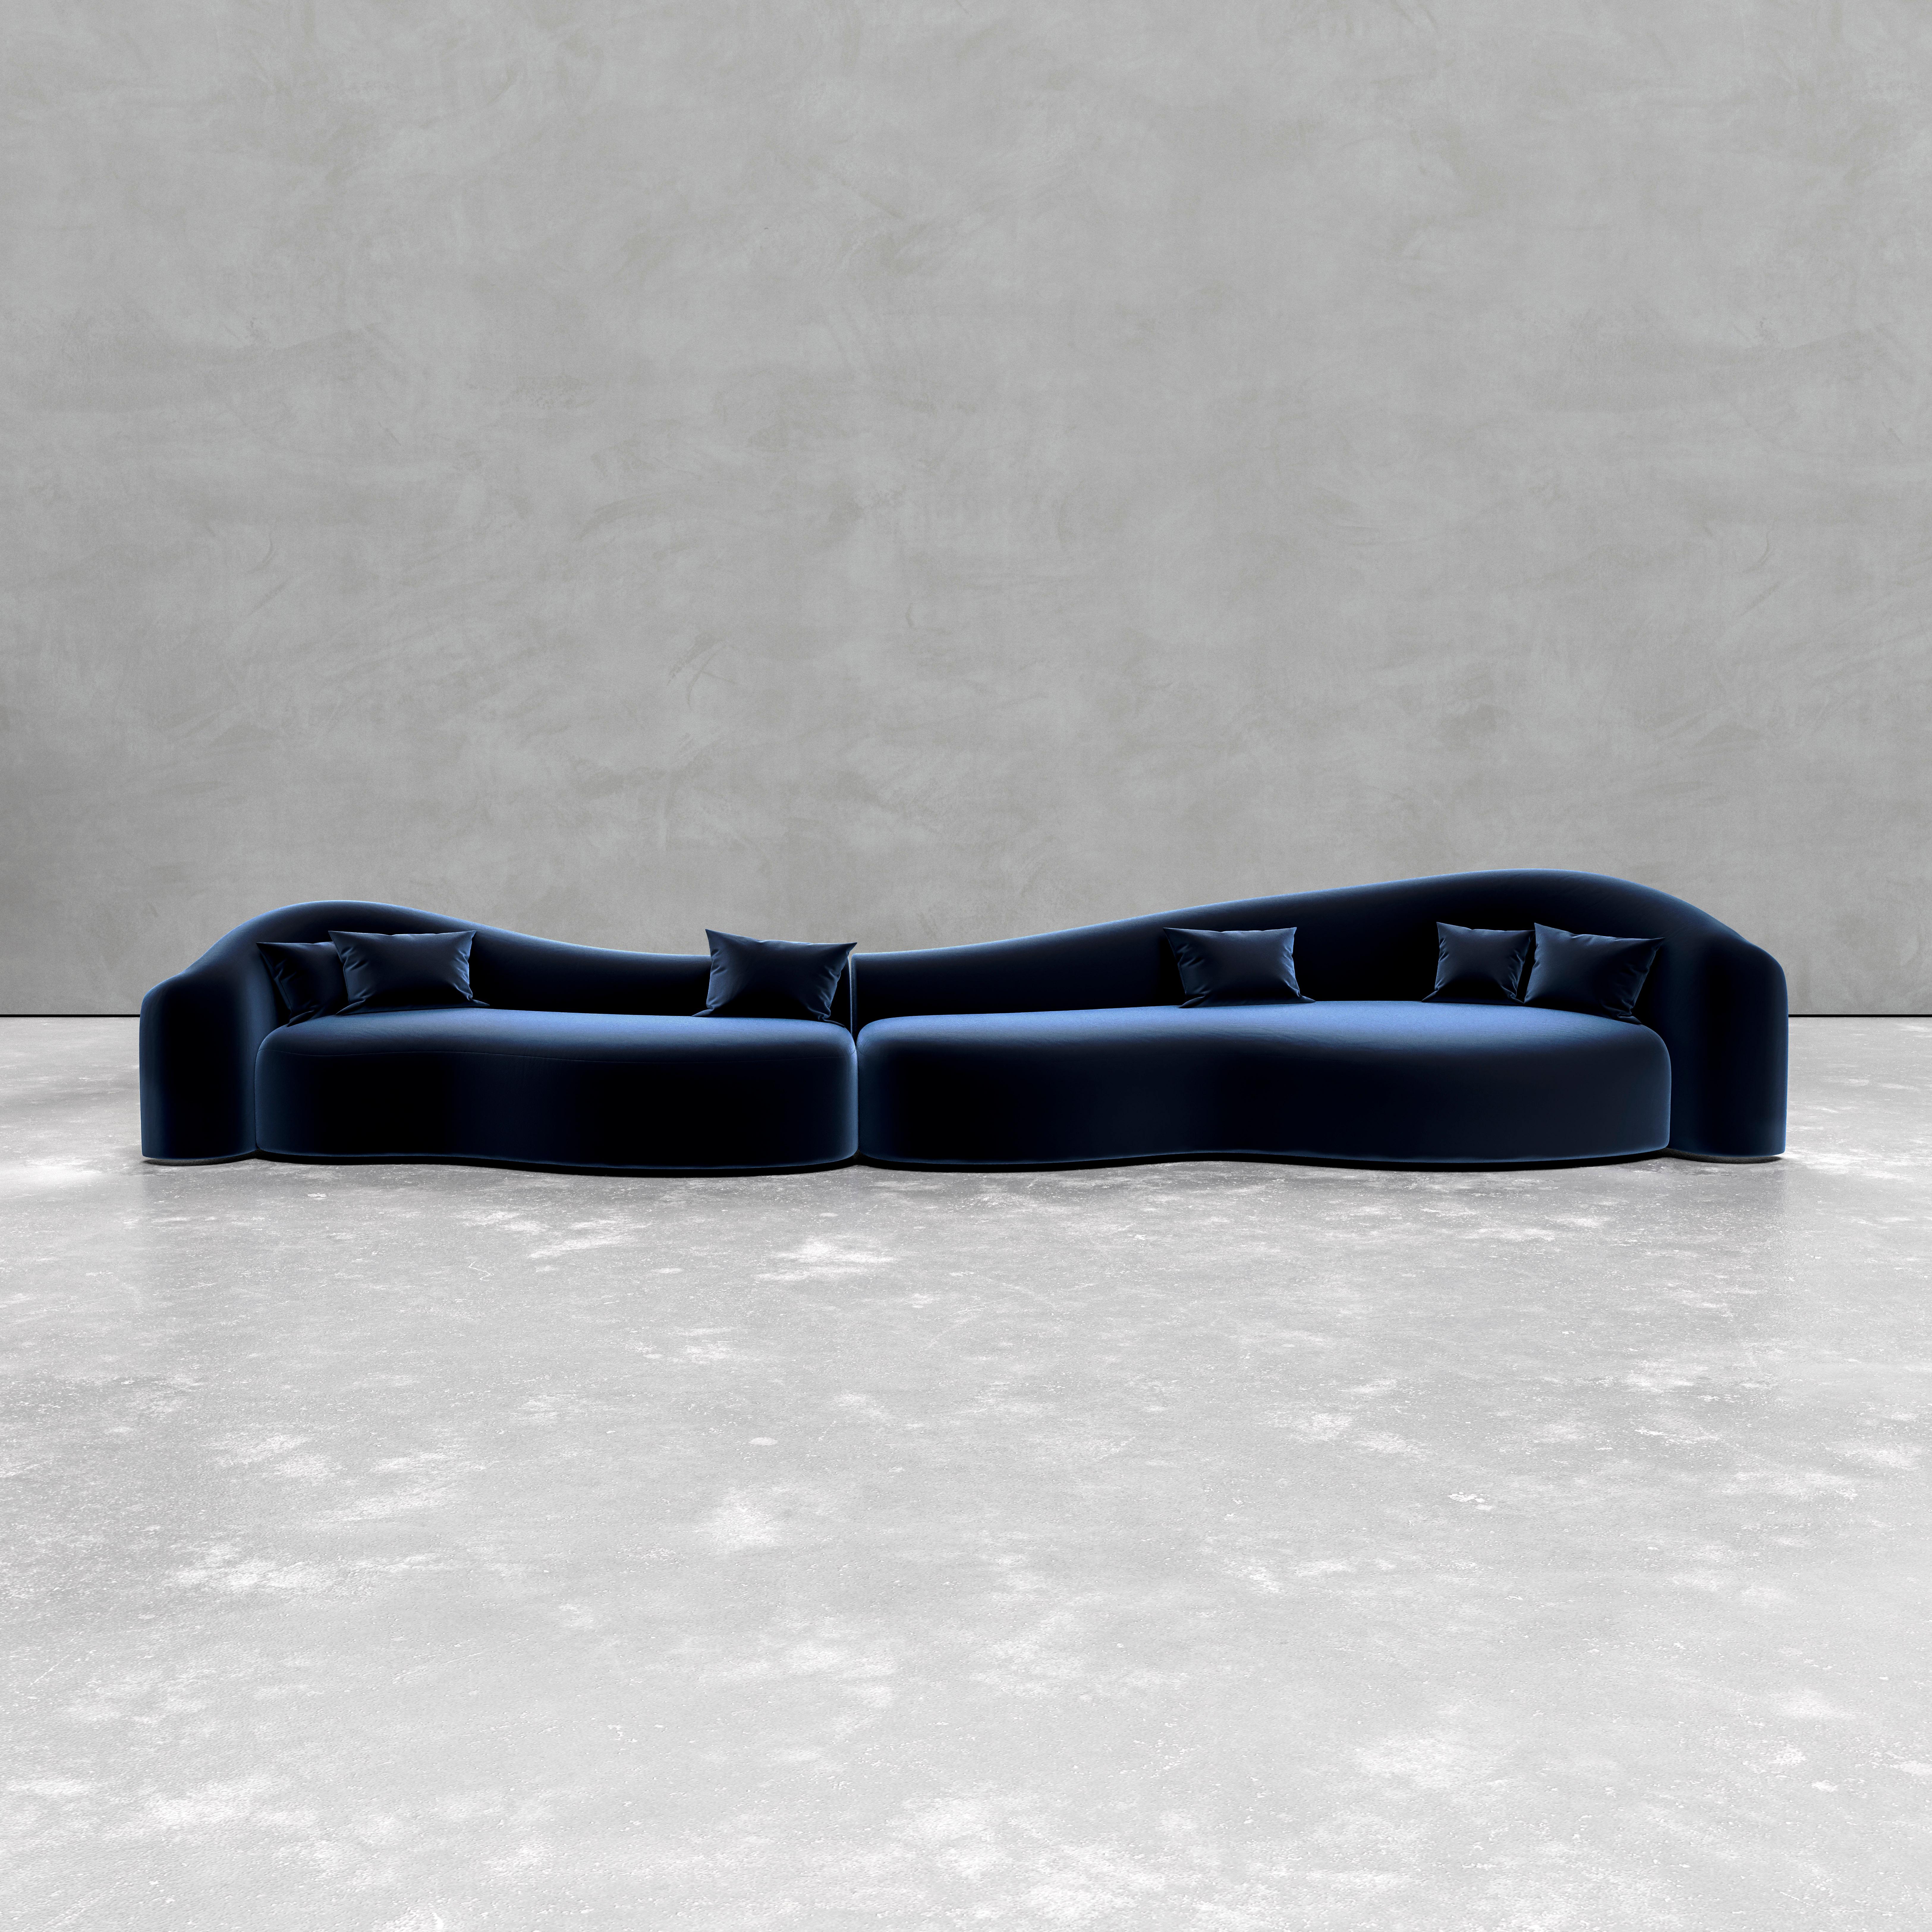 Sofa Baïne by Jerome Bugara Editions 
Limited Edition 25, Signed, serial number and certificate of Authenticity.
Lelièvre navy velvet seat. 6 cushion included.
Made in France. 

100cm seat depth for incomparable comfort

The curves of the Baïne